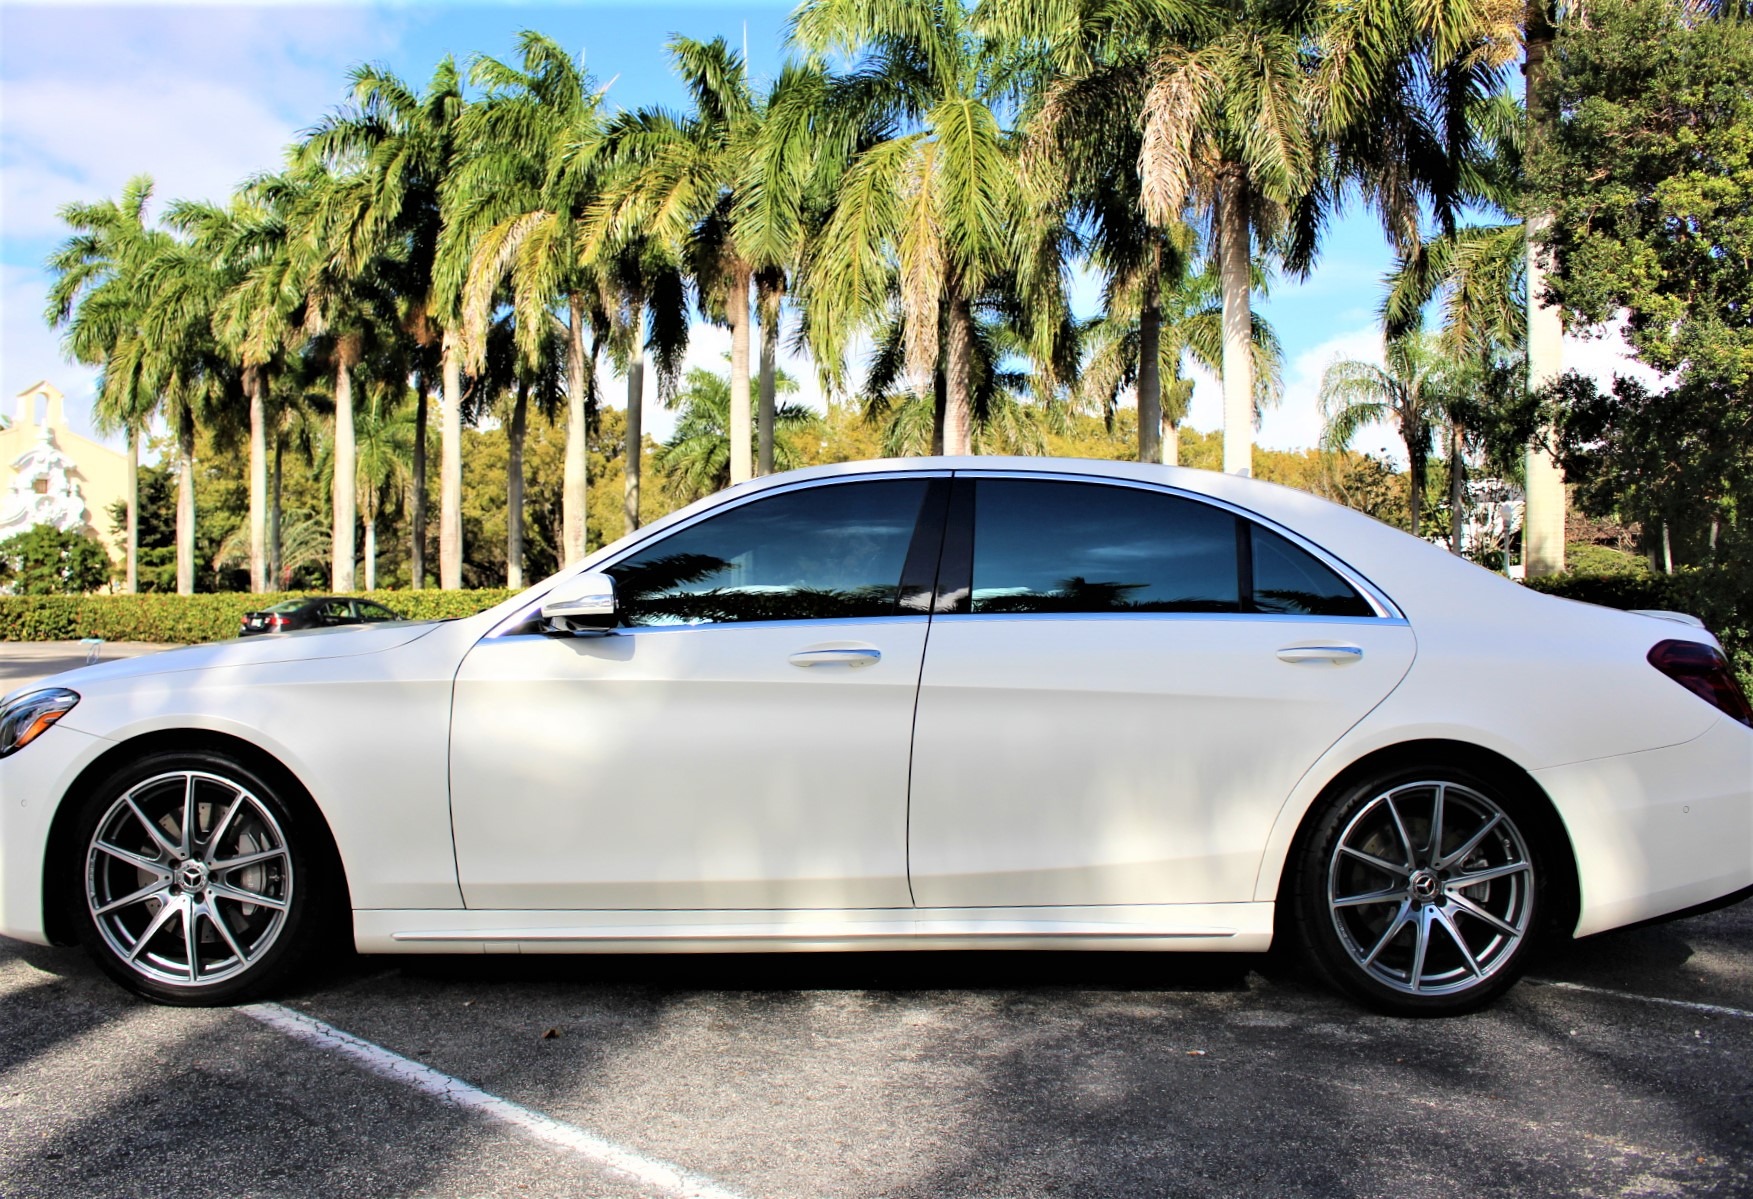 Used 2019 Mercedes-Benz S-Class S 560 for sale Sold at The Gables Sports Cars in Miami FL 33146 4